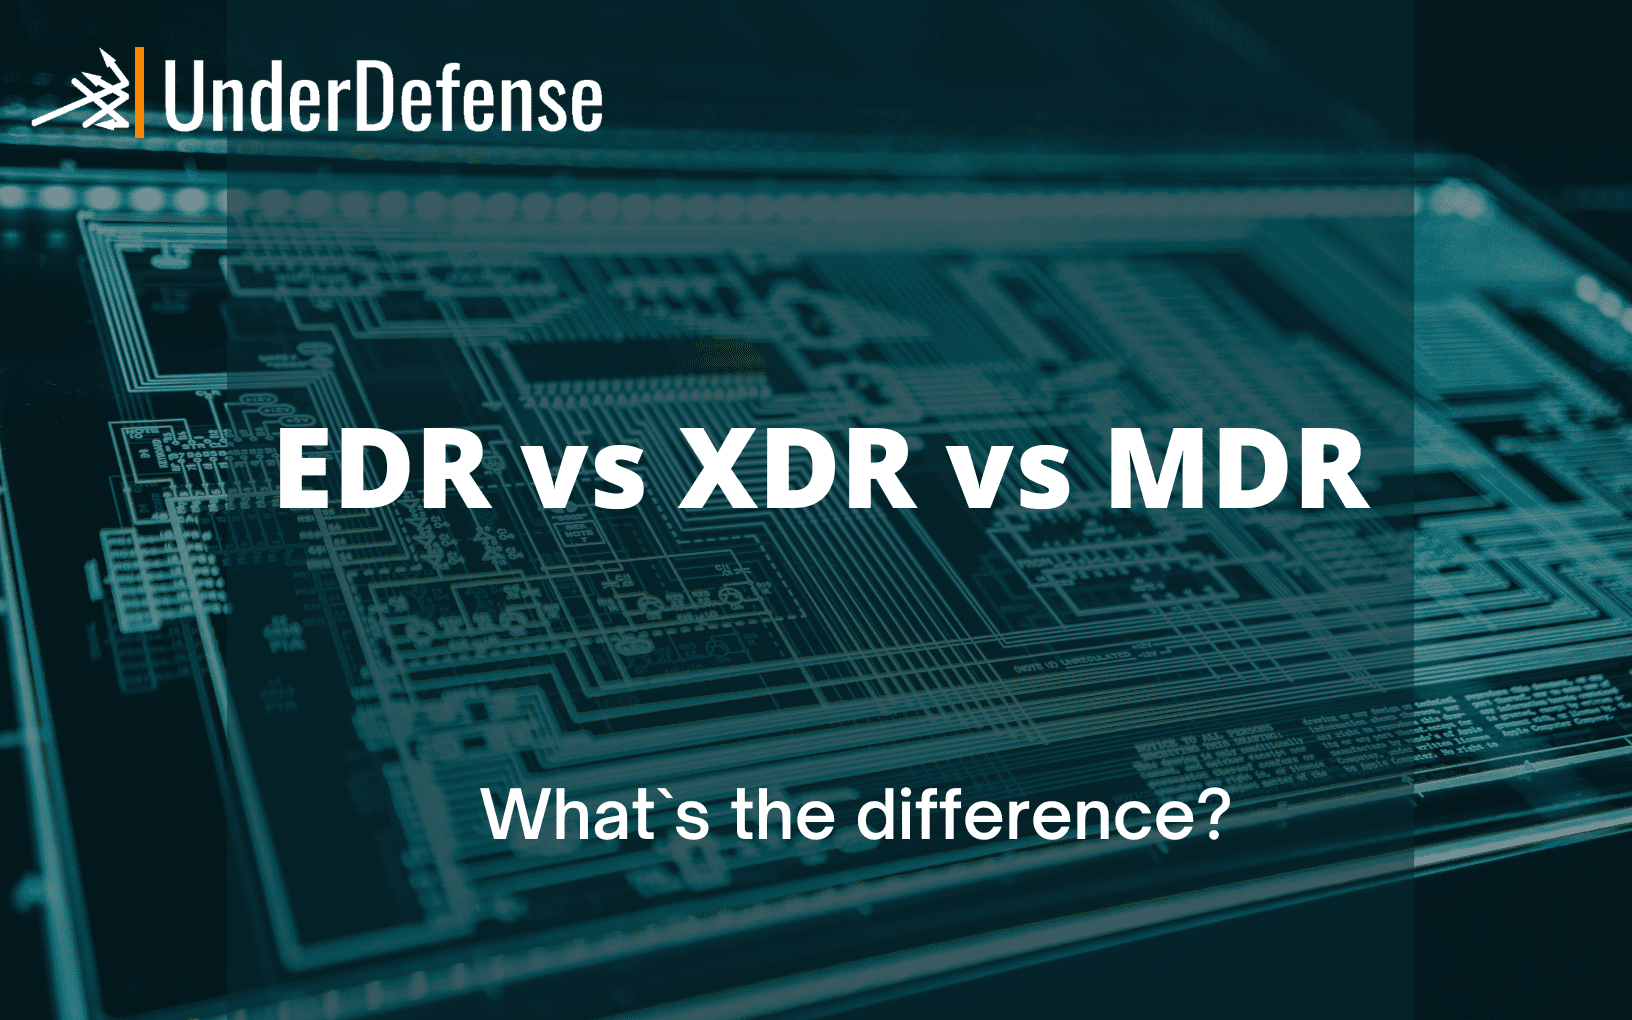 Edr Vs Xdr Vs Mdr What`s The Difference